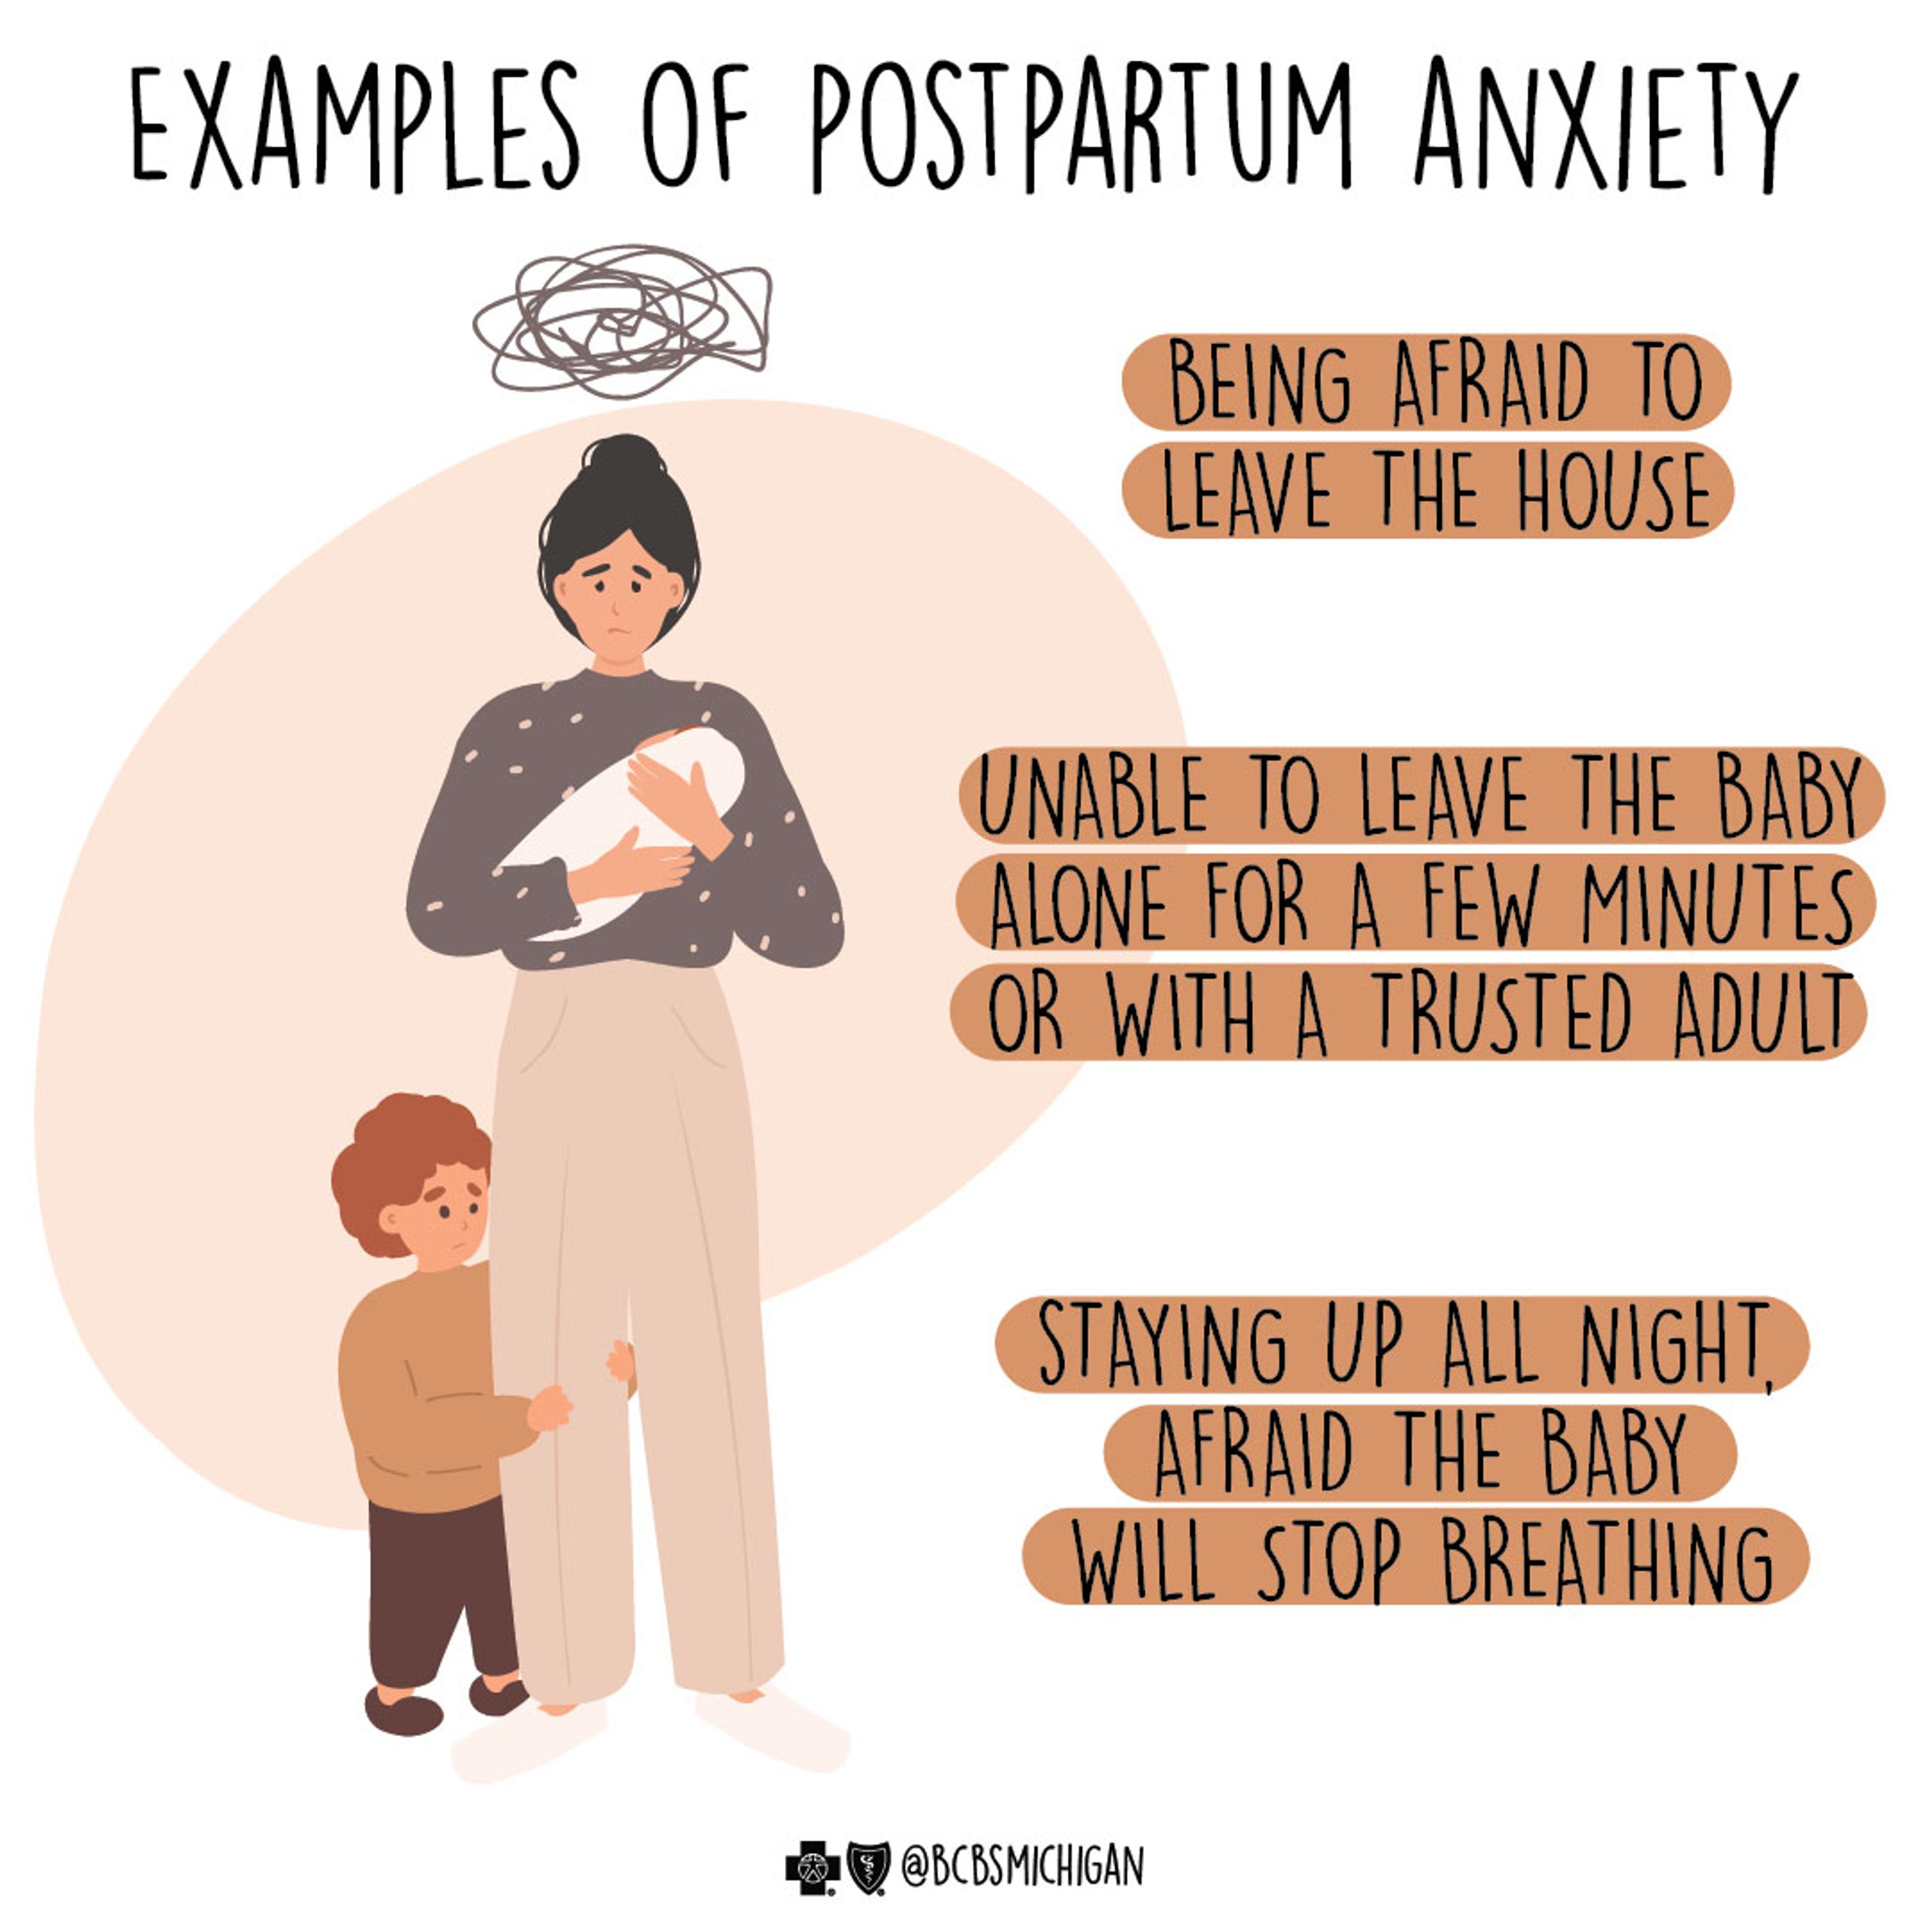 Postpartum Exhaustion: Is It O.K. for New Parents to Solicit